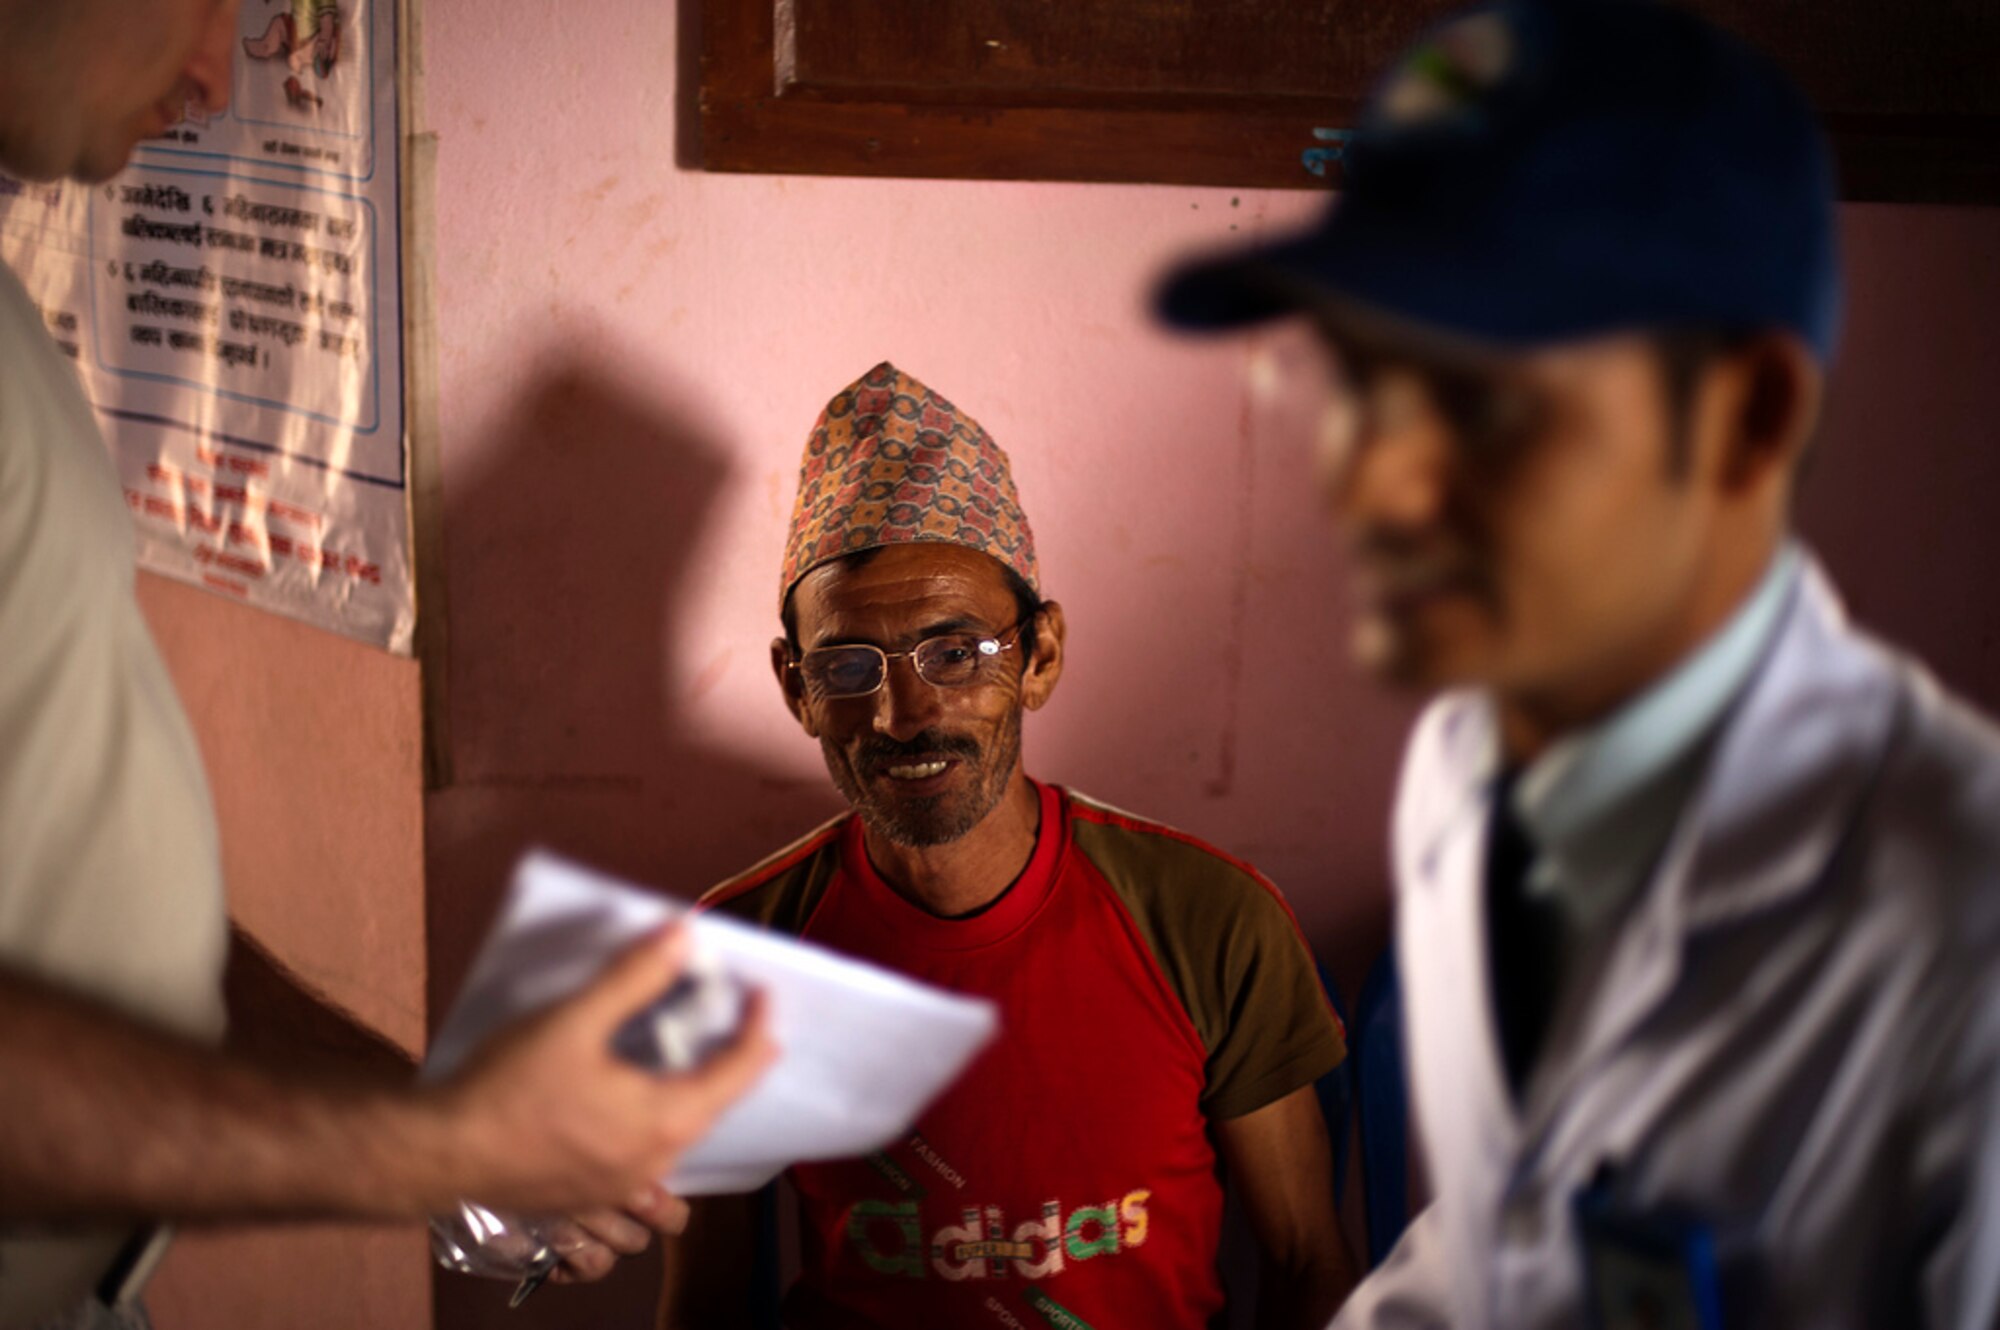 A Nepali man smiles after receiving new glasses during U.S. Pacific
Command's Operation Pacific Angel 12-4, Nepal. Pacific Angel 12-4 is a
Pacific Air Forces planned event that enhances humanitarian assistance and
disaster relief capabilities between the United States and Pacific partners.
The U.S. was invited by the Nepal government to provide support by
conducting medical, optometry, and civil engineering programs. Operations
like Pacific Angel build and sustain relationships with our multinational
partners in the Asia-Pacific region. (U.S. Air Force photo/Master Sgt.
Jeffrey Allen)
